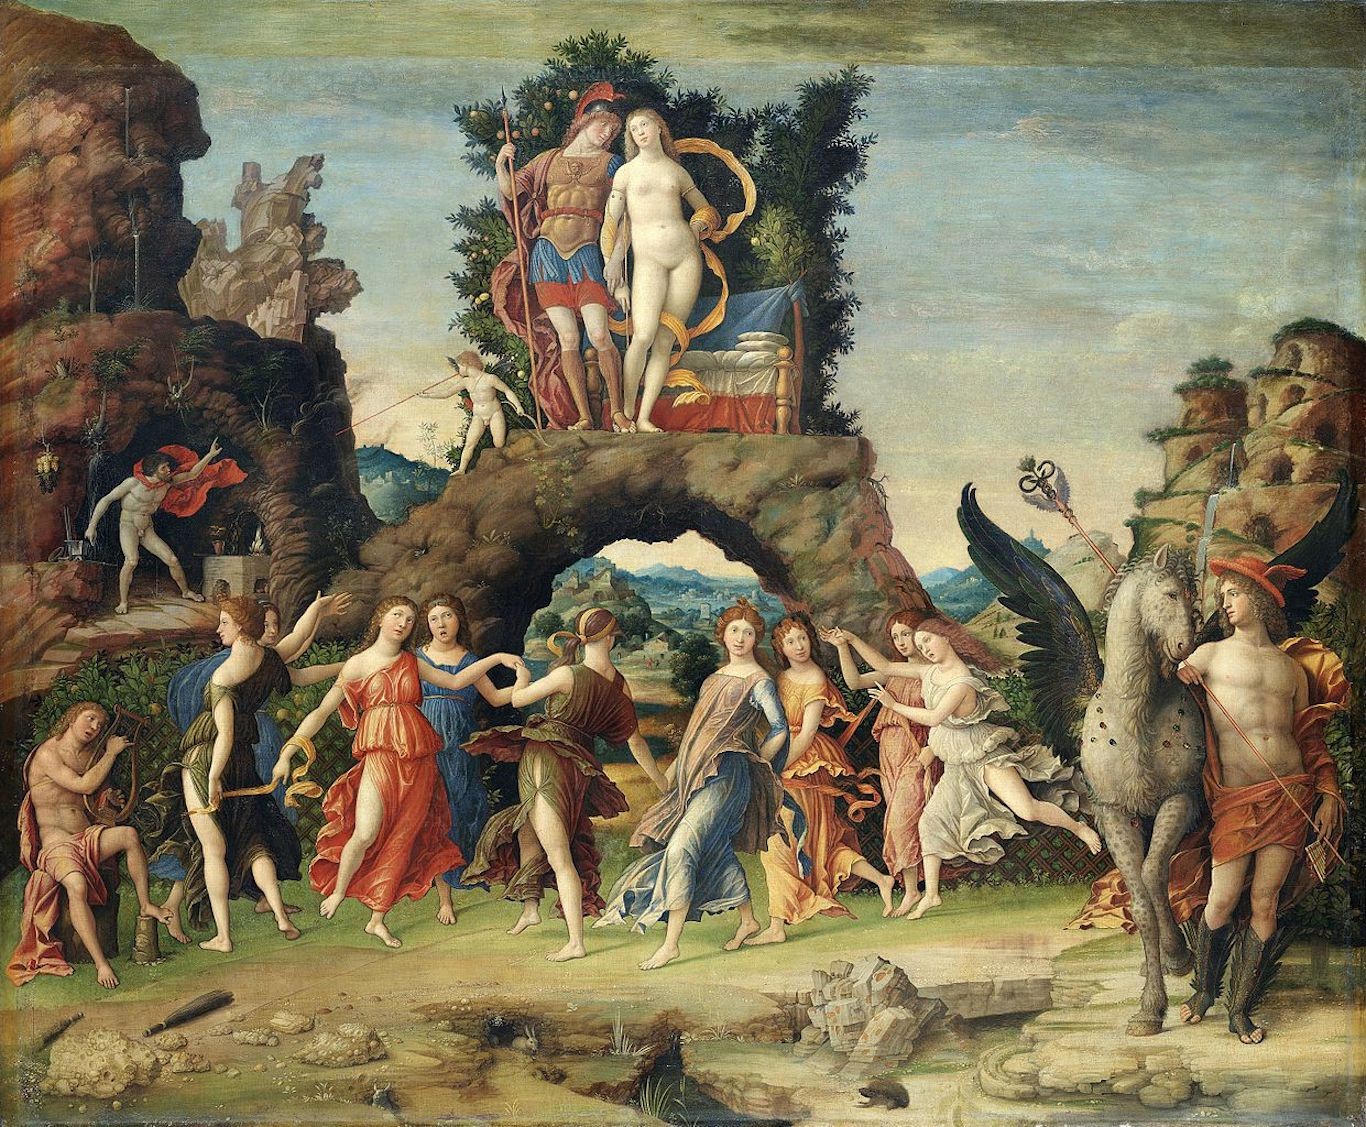 La_Parnasse_by_Andrea_Mantegna_from_C2RMF_retouched_copy.jpg